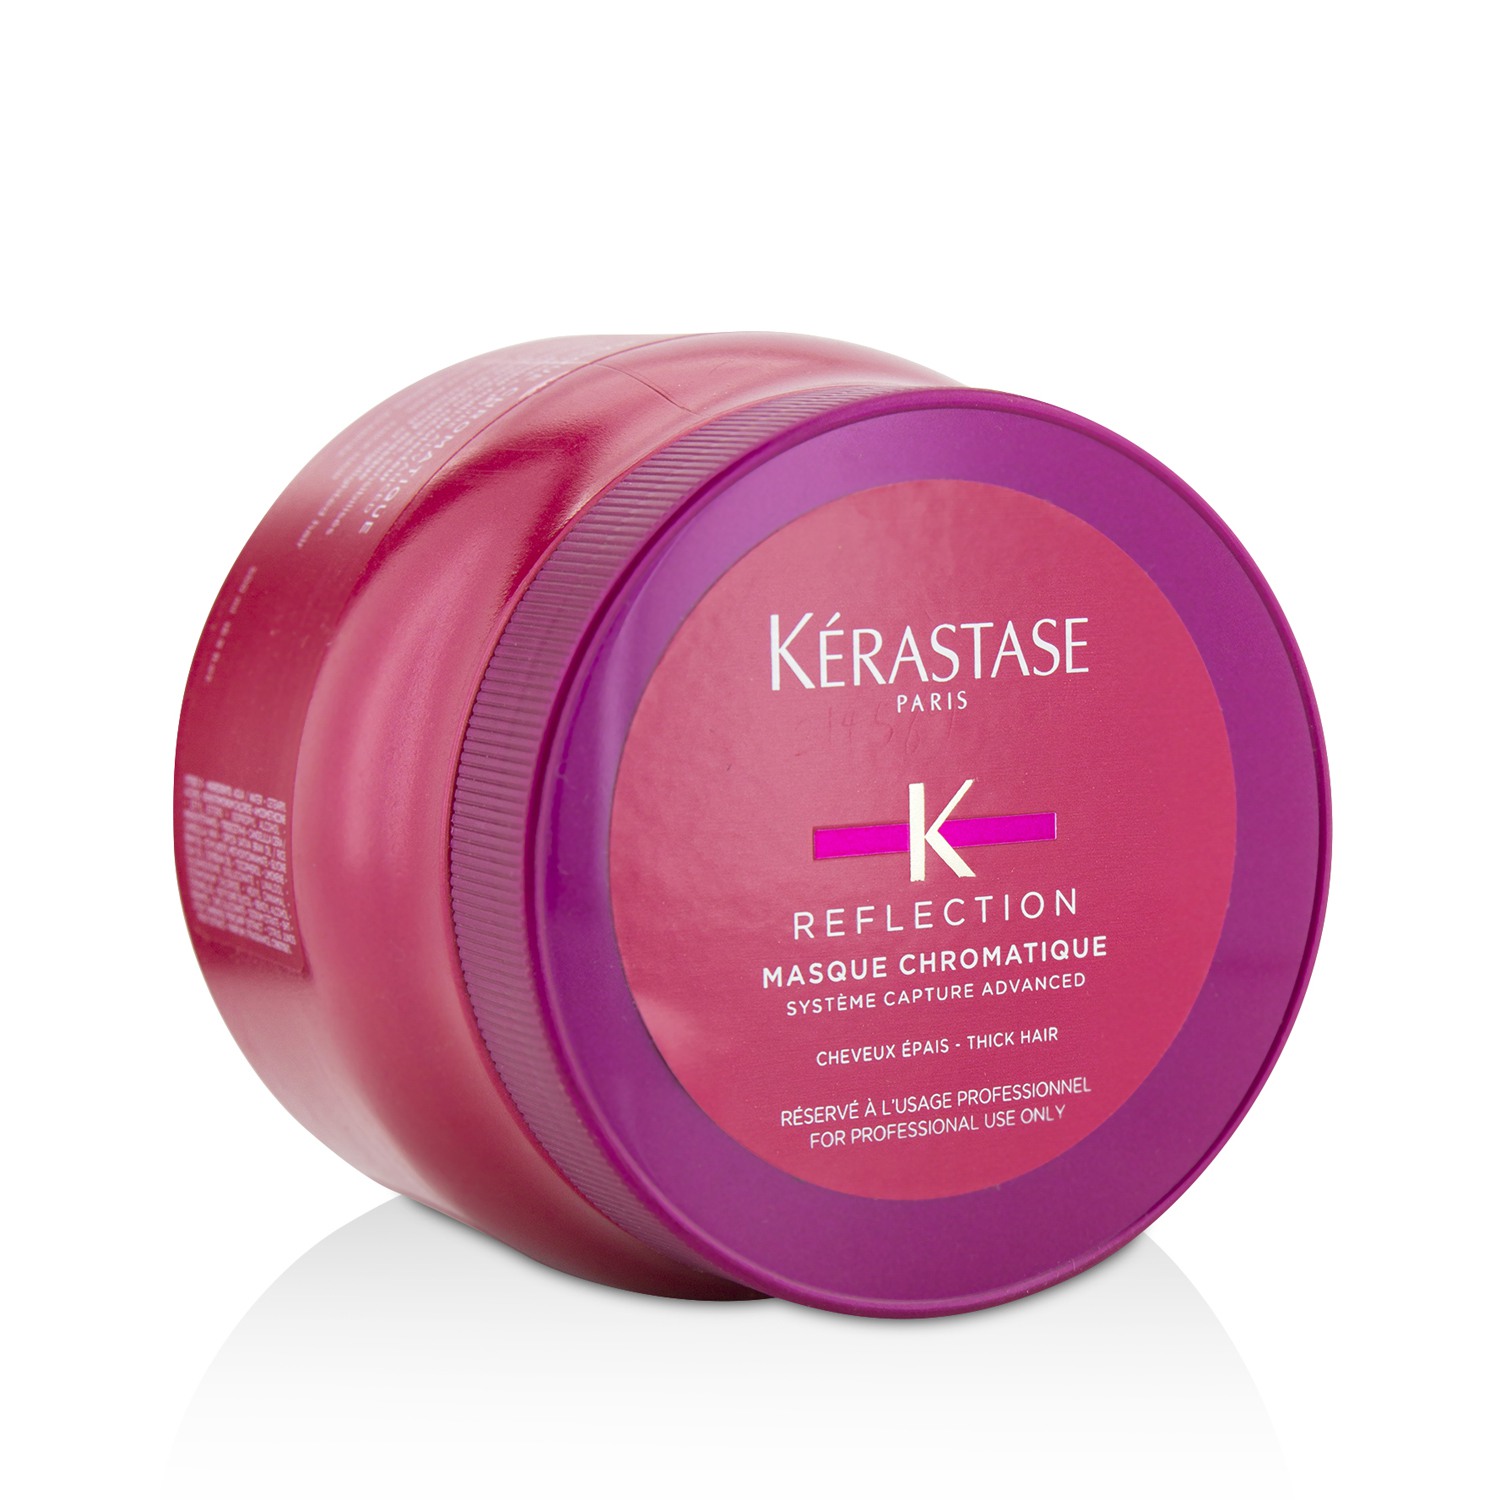 Reflection Masque Chromatique Multi-Protecting Masque (Sensitized Colour-Treated or Highlighted Hair - Thick Hair) Kerastase Image